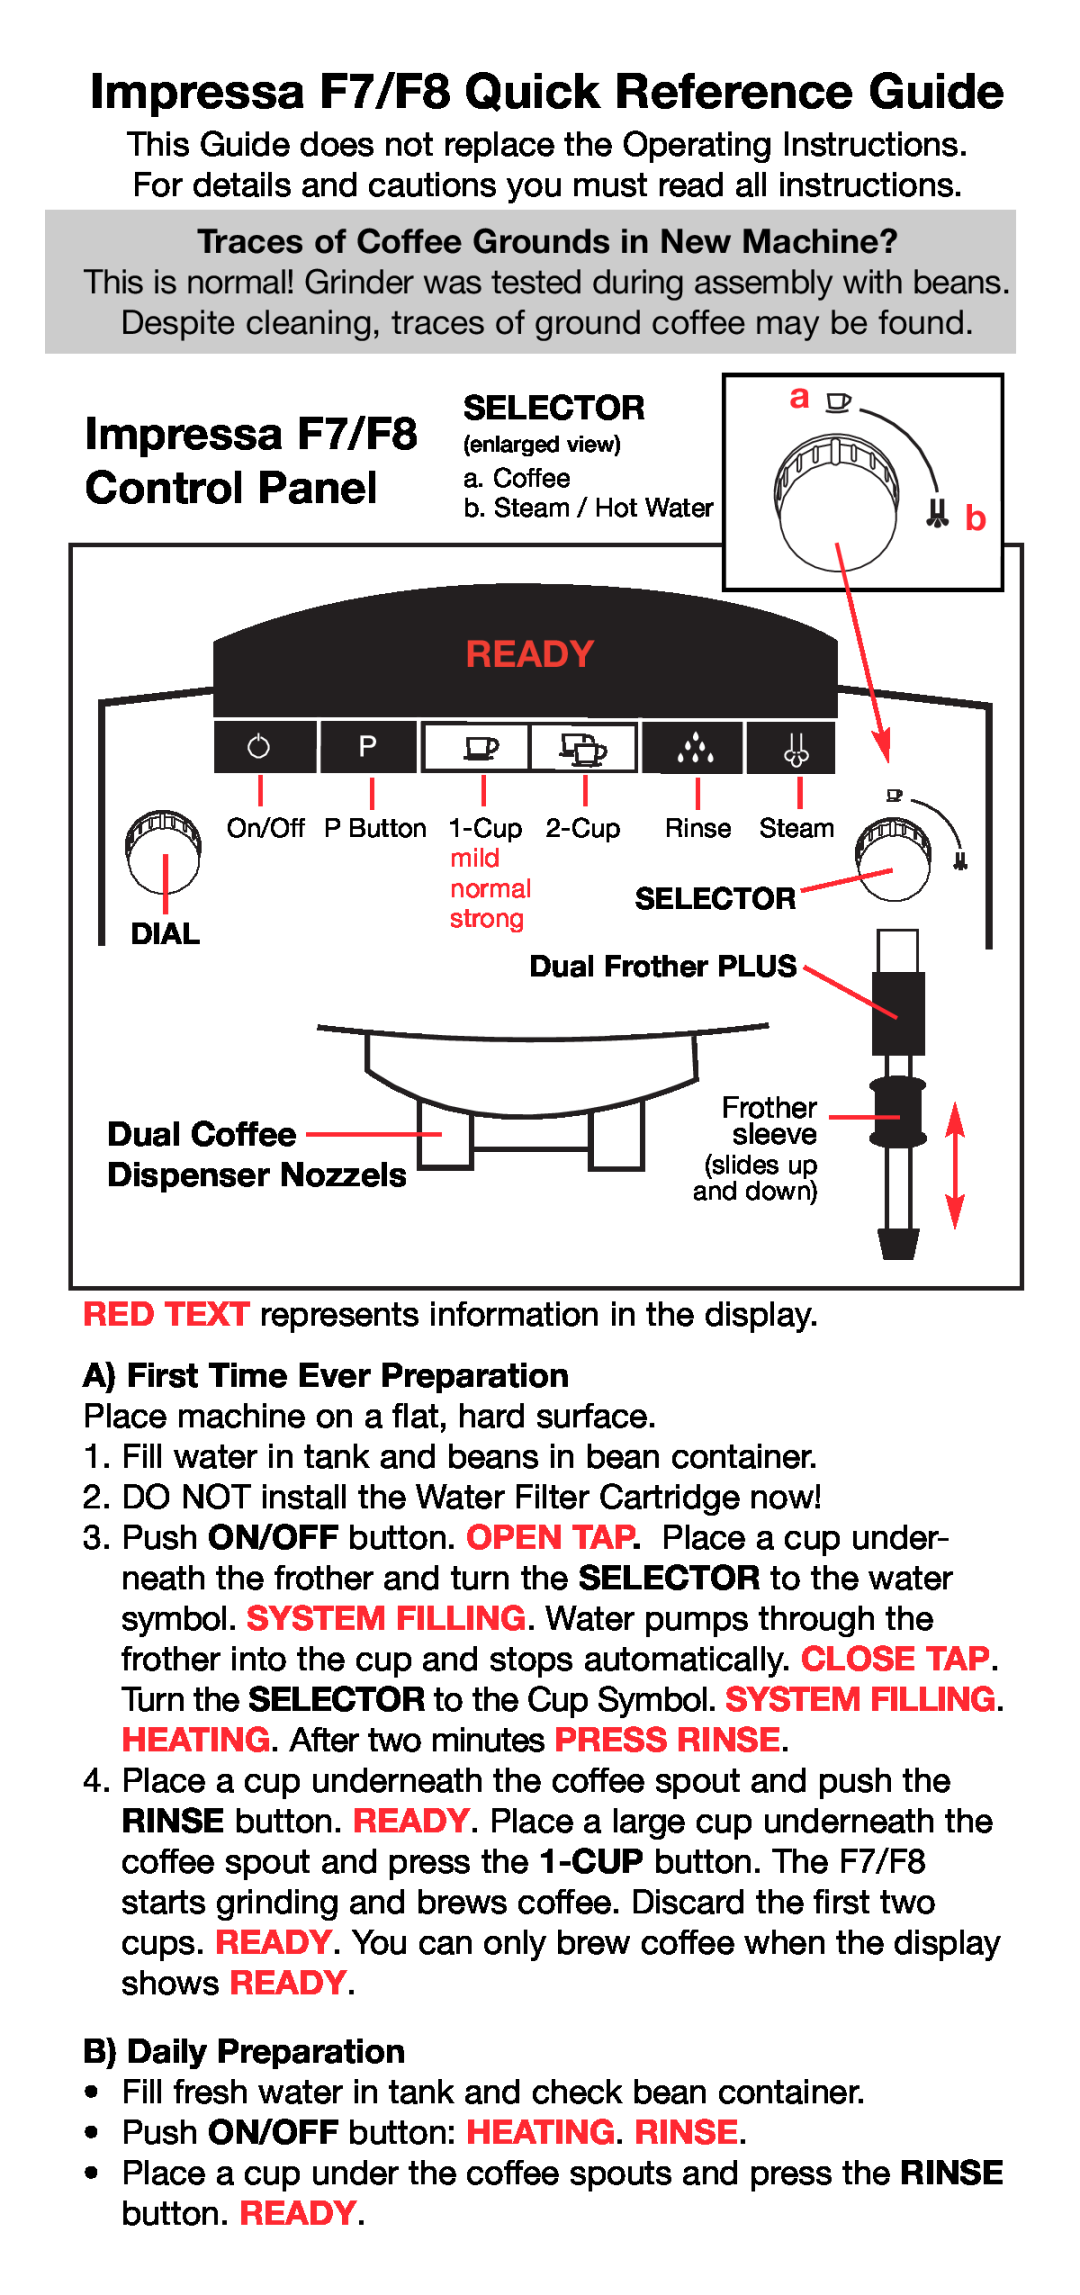 Capresso F7, F8 operating instructions Traces of Coffee Grounds in New Machine?, Selector, Dual Coffee, Dispenser Nozzels 